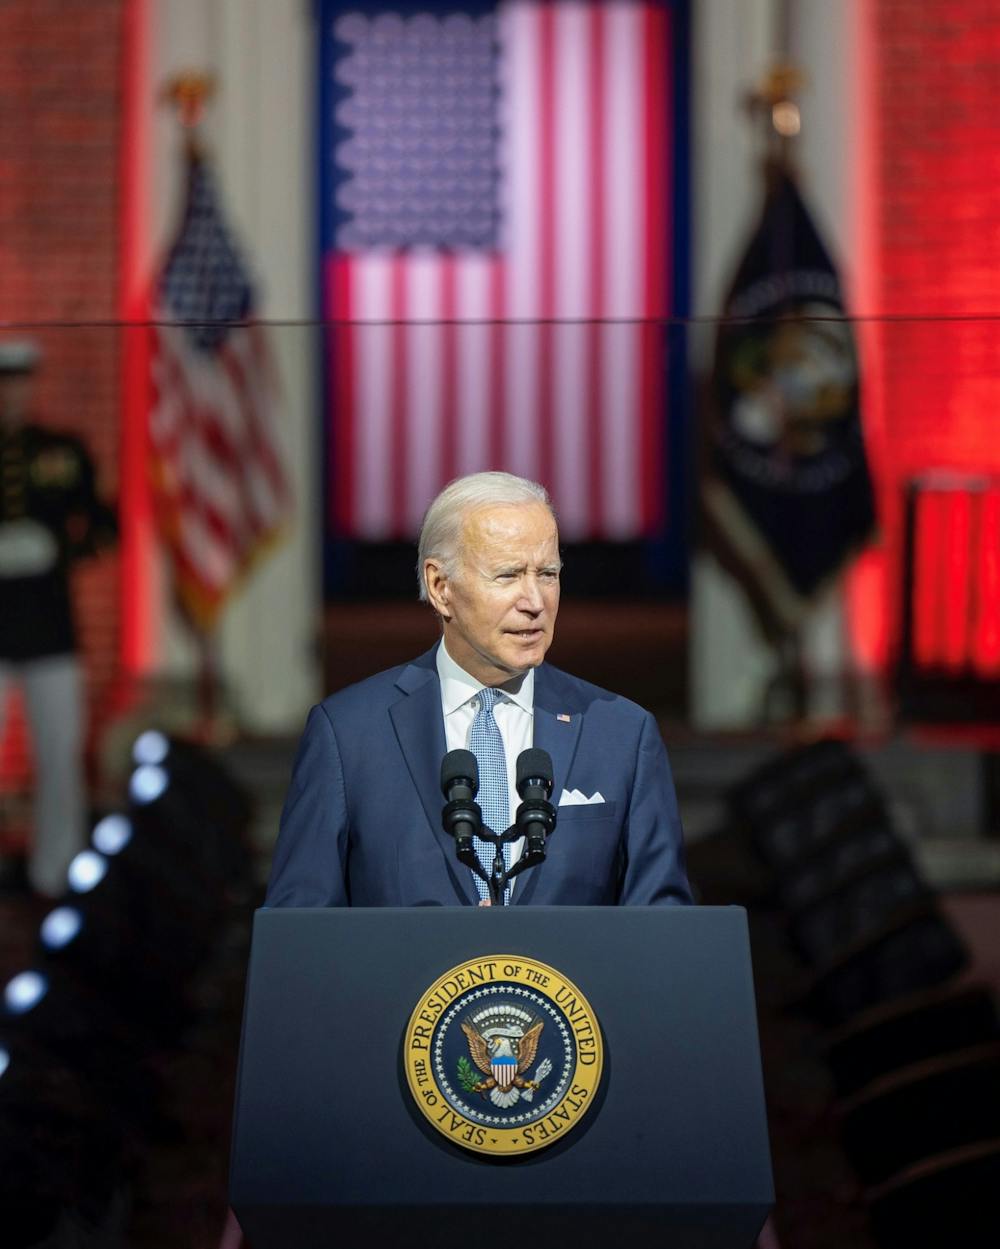 <p><em>President Biden delivered a speech at Independence Hall, in which he directly confronted the “threat” posed by Donald Trump and those who support him. (Office of the President. Posted to </em><a href="https://www.facebook.com/photo/?fbid=548491063944528&amp;set=a.356649399795363" target=""><em>Facebook</em></a><em> on Sept. 1, 2022)</em></p>